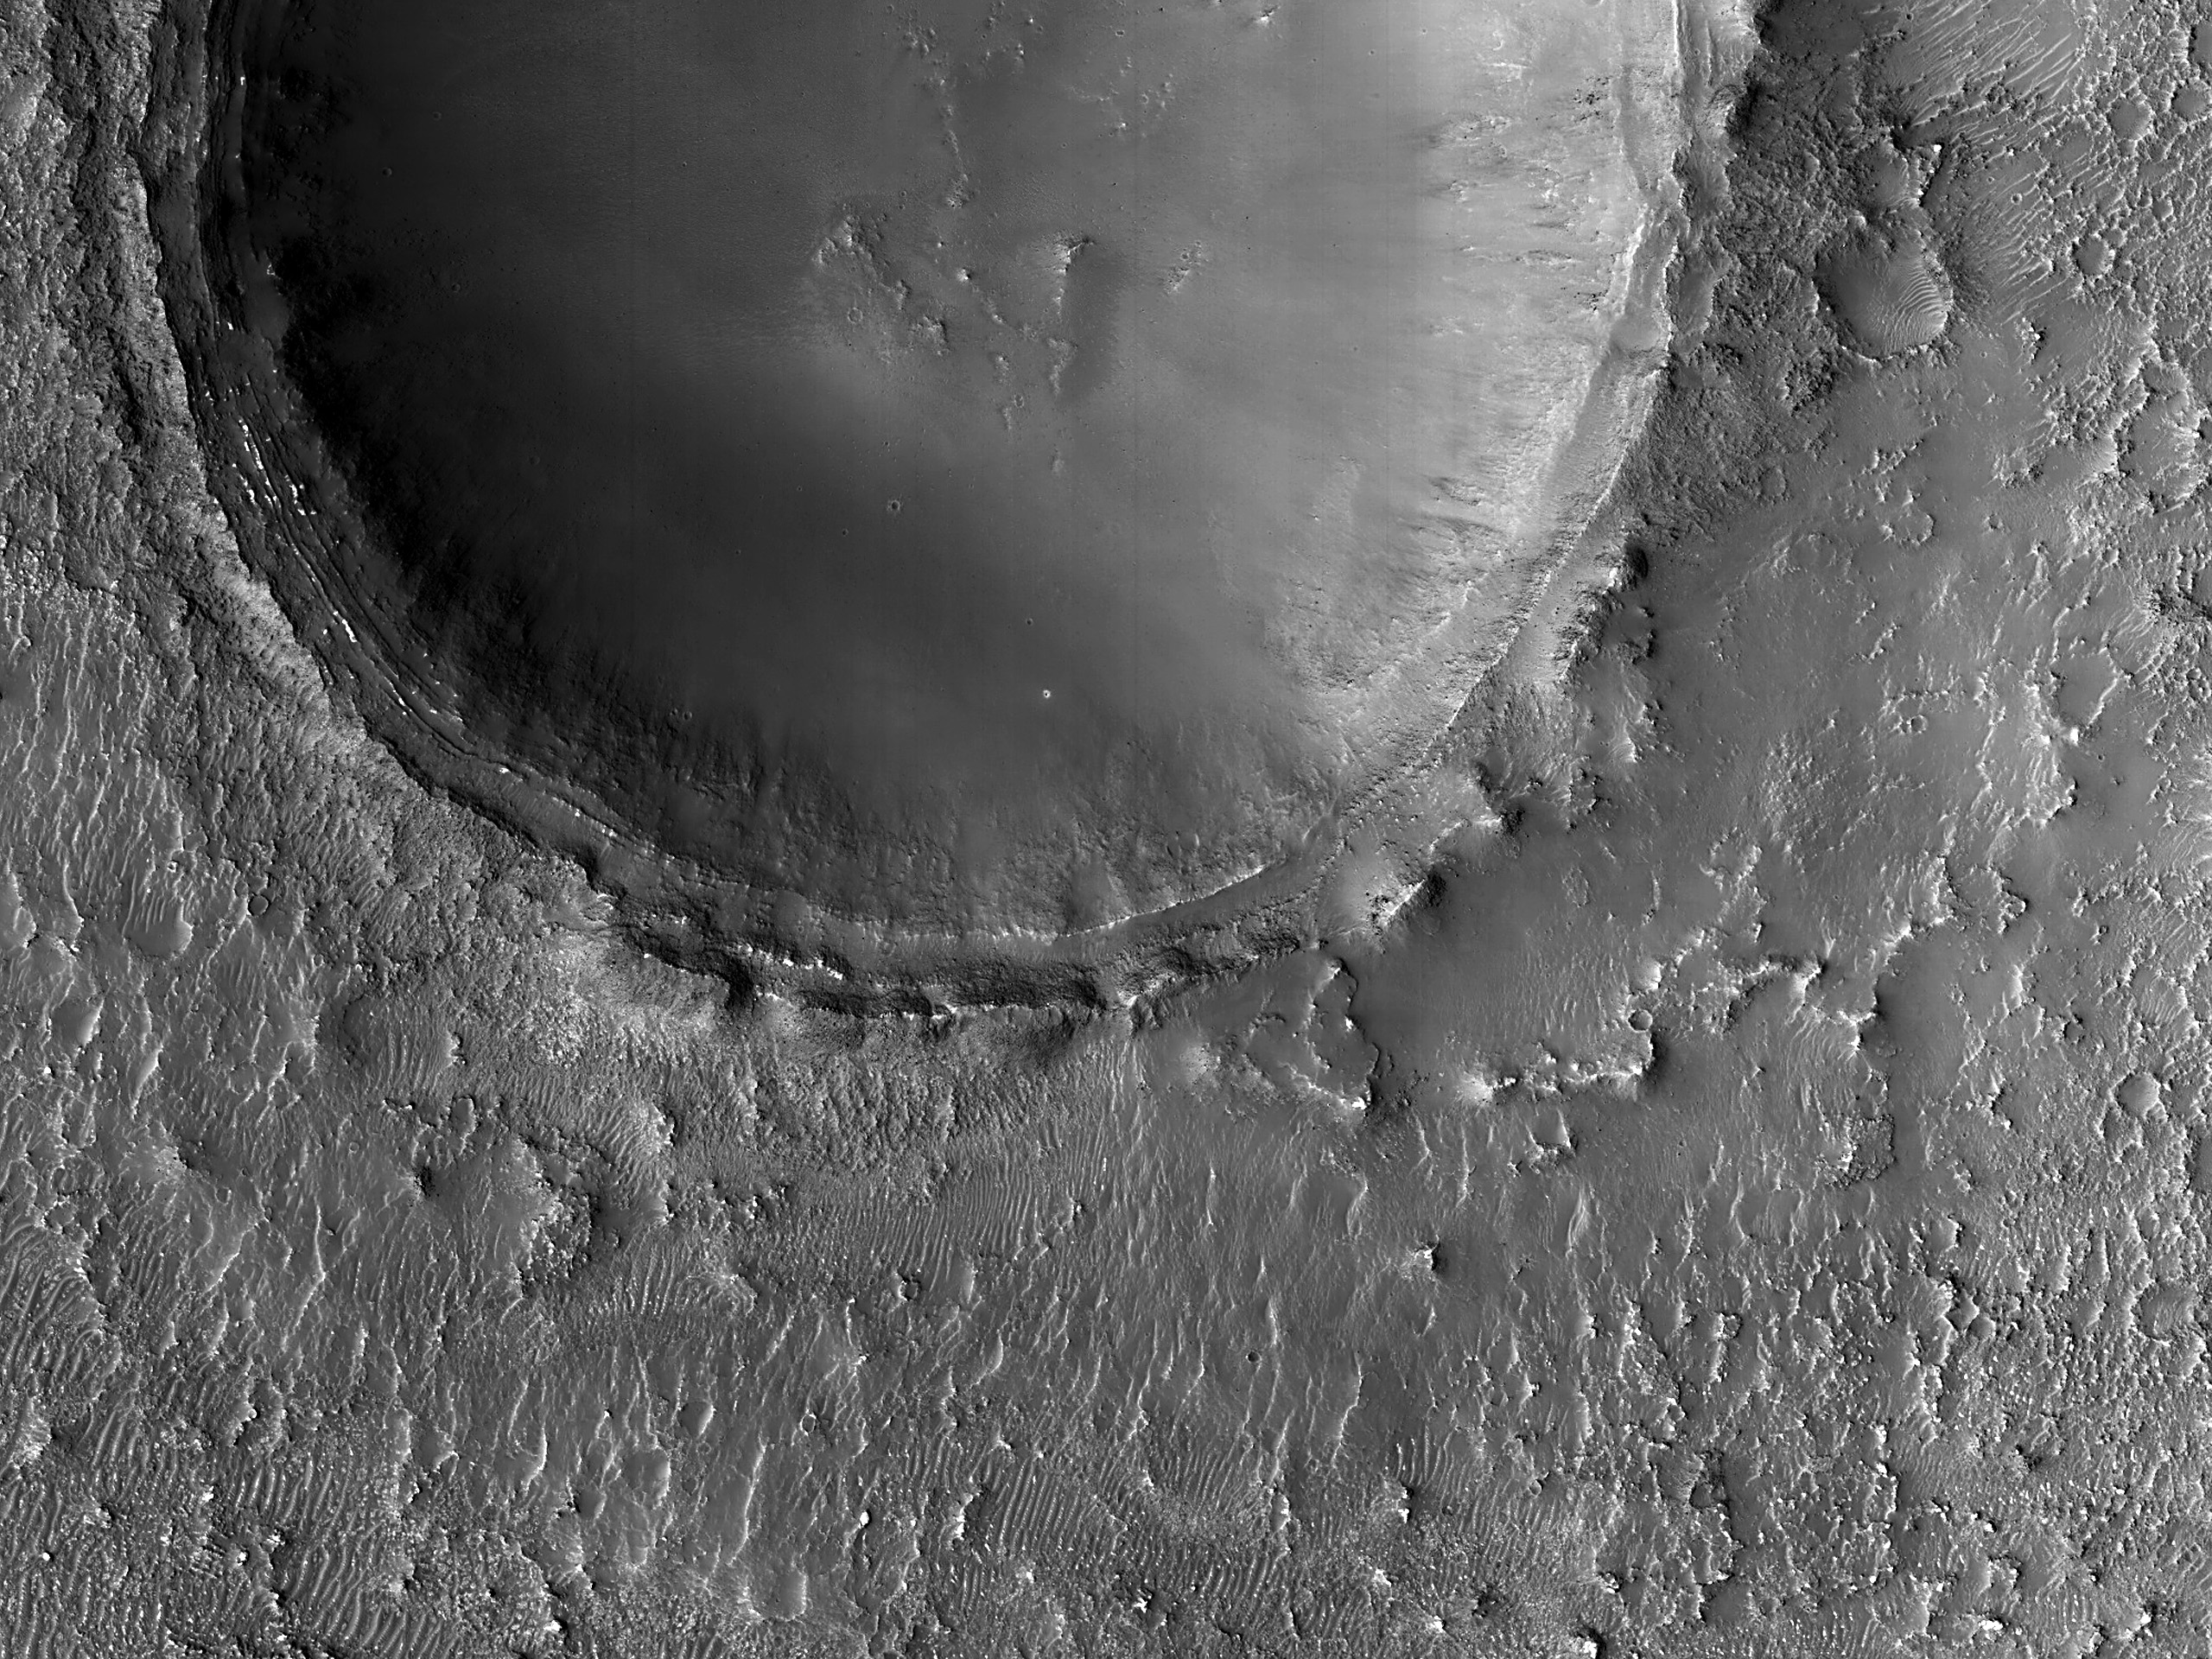 Layers in a Low Latitude Crater